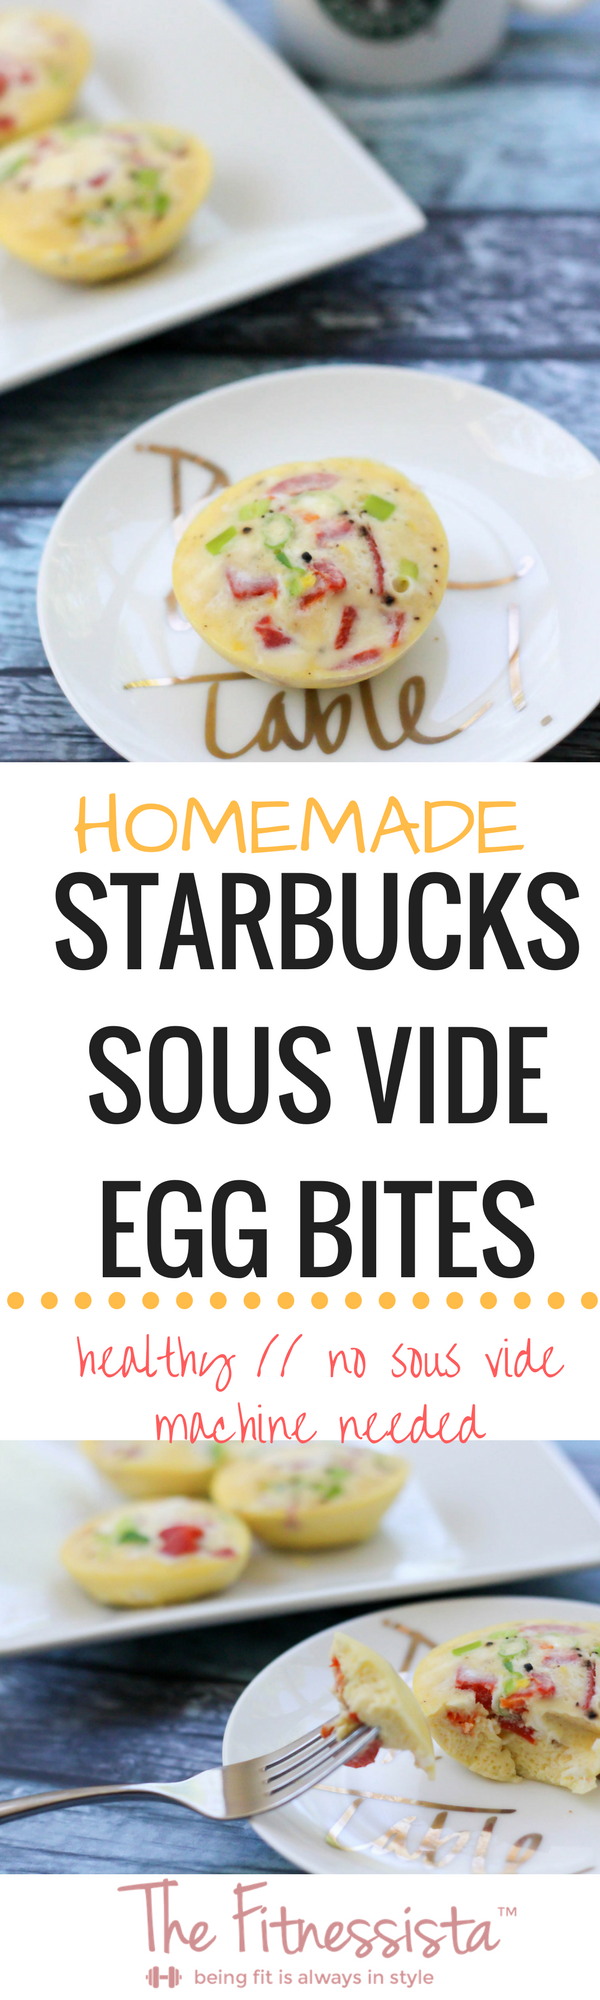 https://fitnessista.com/wp-content/uploads//2017/05/homemade-healthy-starbucks-sous-vide-egg-bites-without-the-sous-vide-machine.png